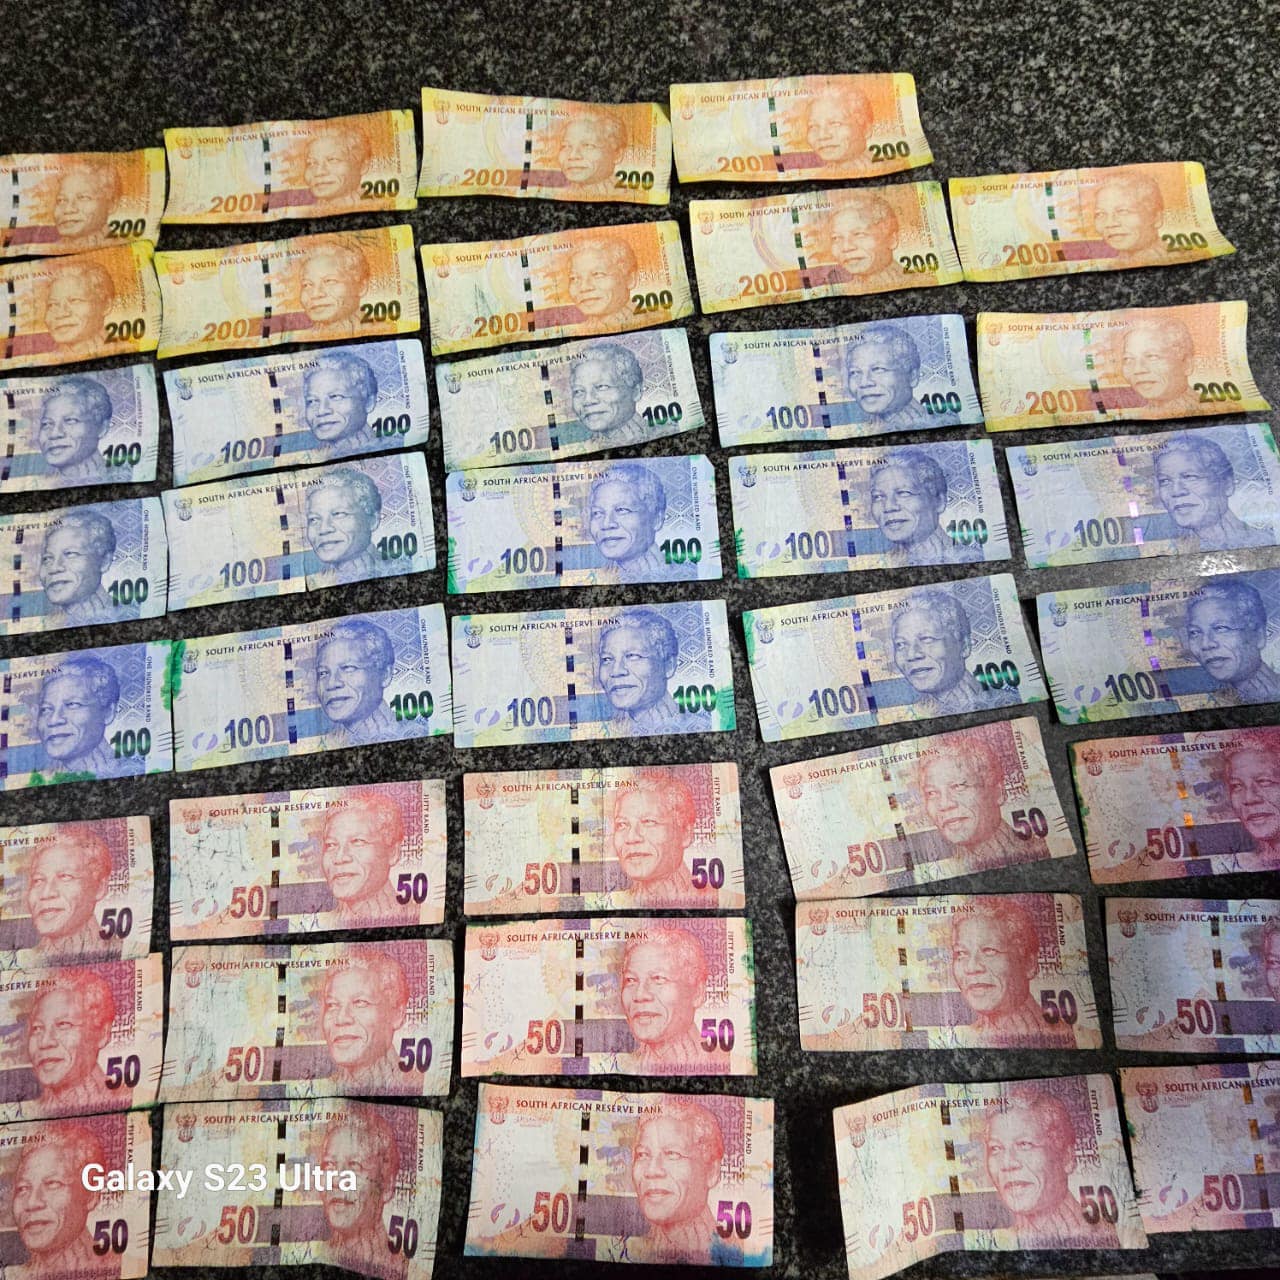 More than R4 000 dye-stained cash notes recovered in Delmore Park